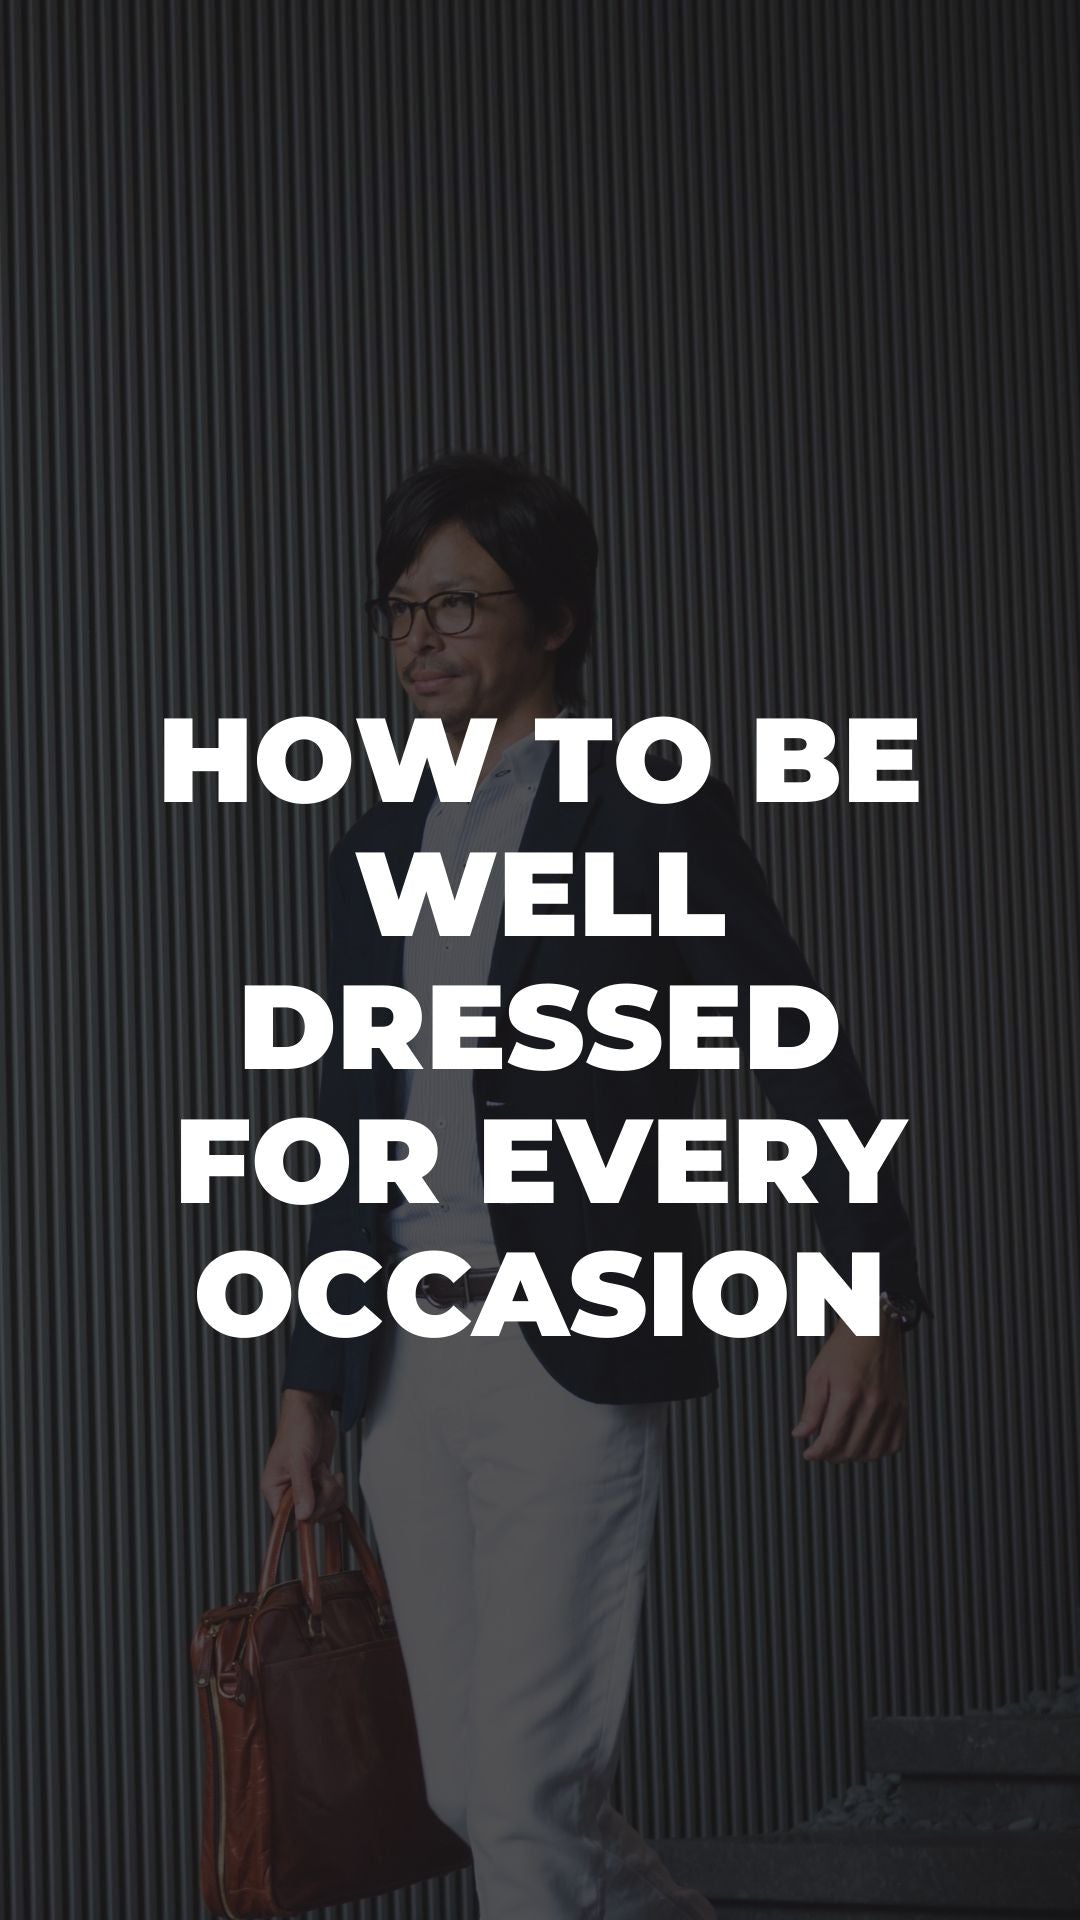 How To Be Well Dressed For Every Occasion - LIFESTYLE BY PS